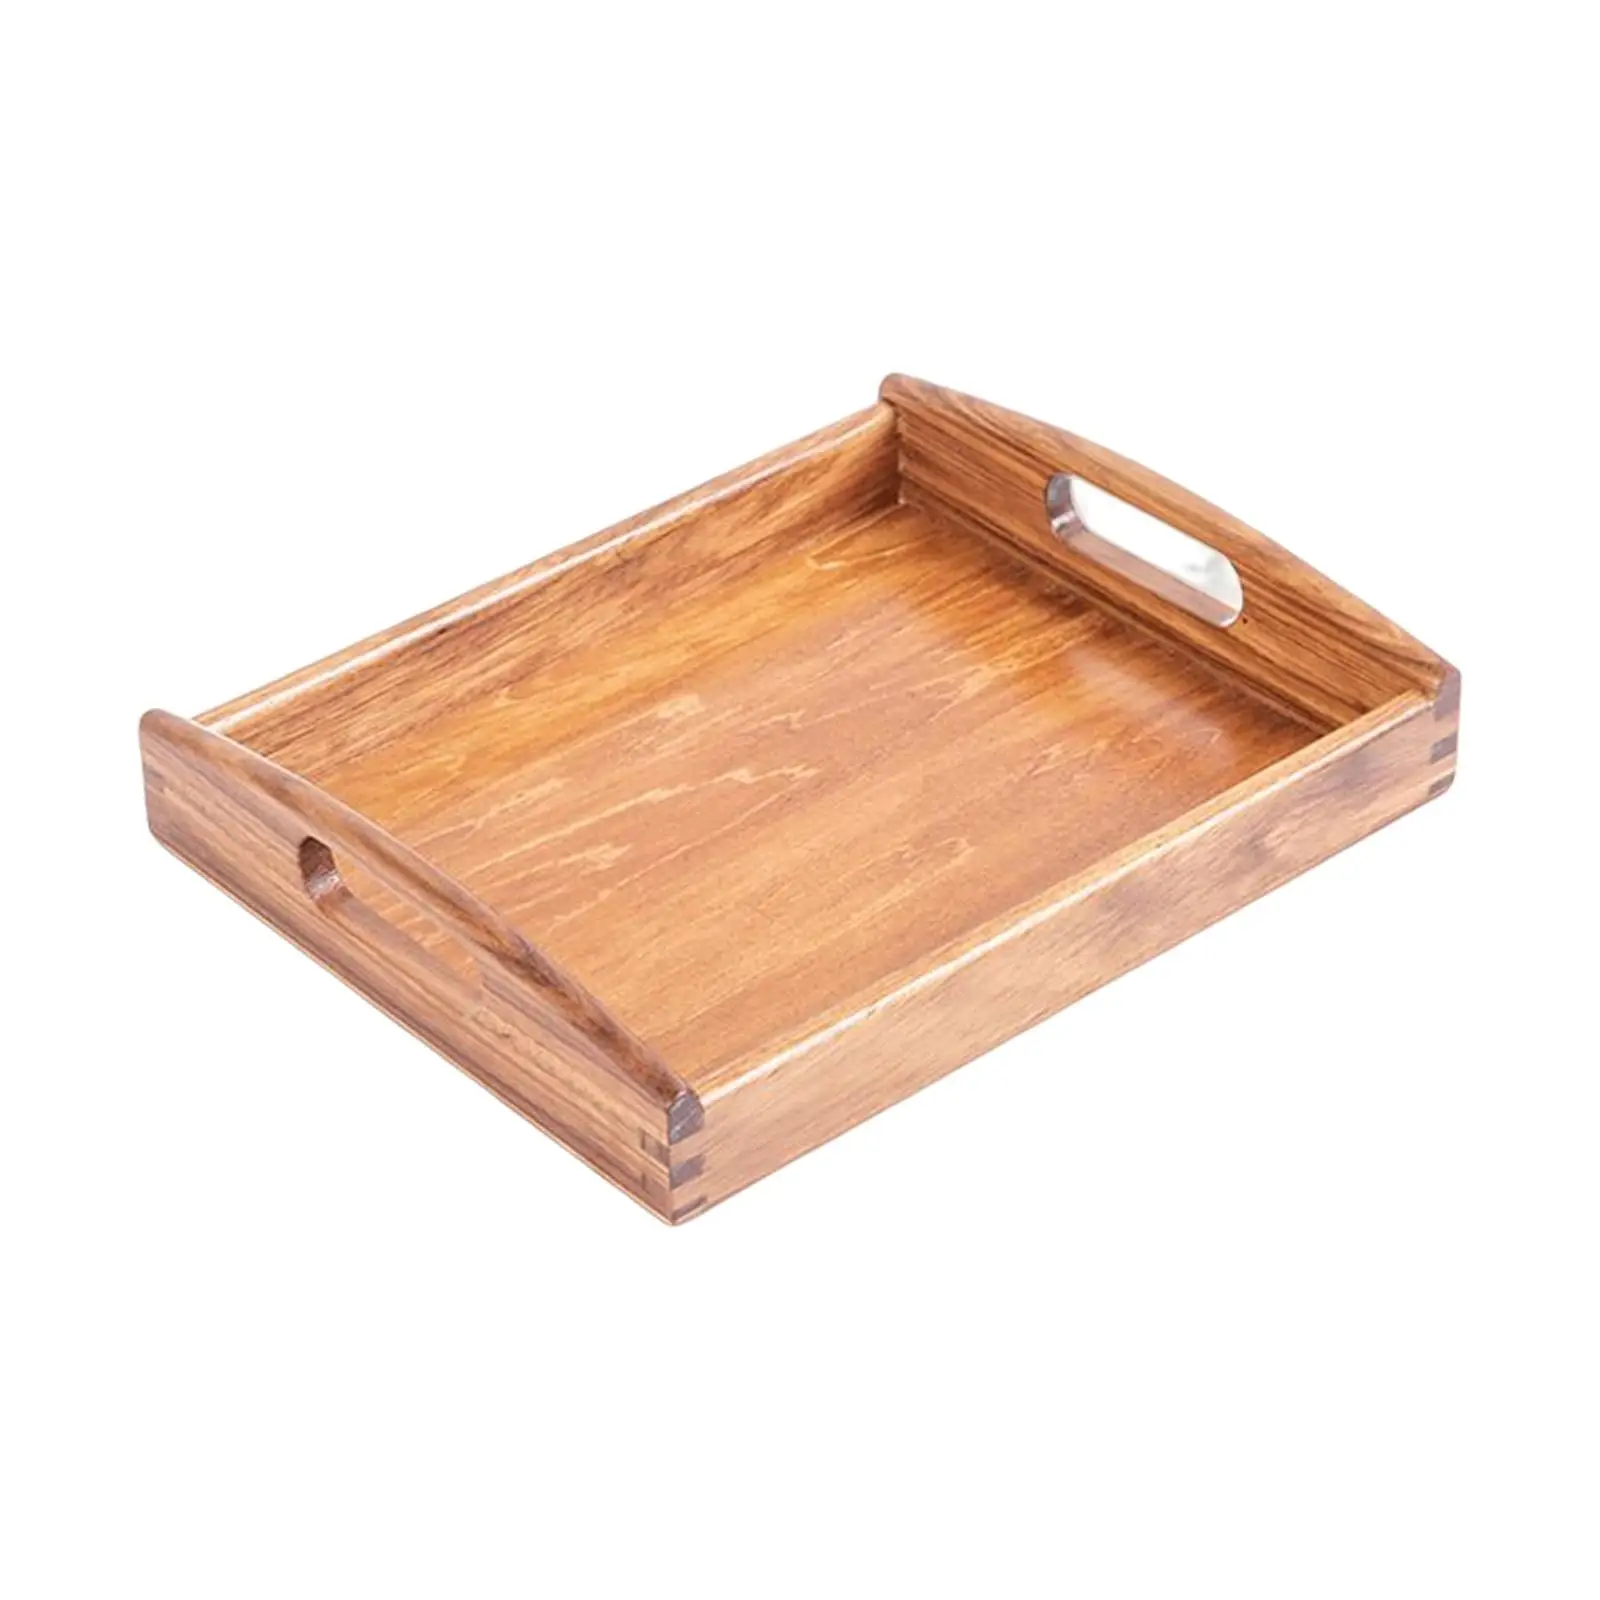 Decorative Wooden Tray with 2 Handle Storage Centerpiece Wedding Gift Serving Platters for Patio Ottoman Breakfast in Bed Lunch